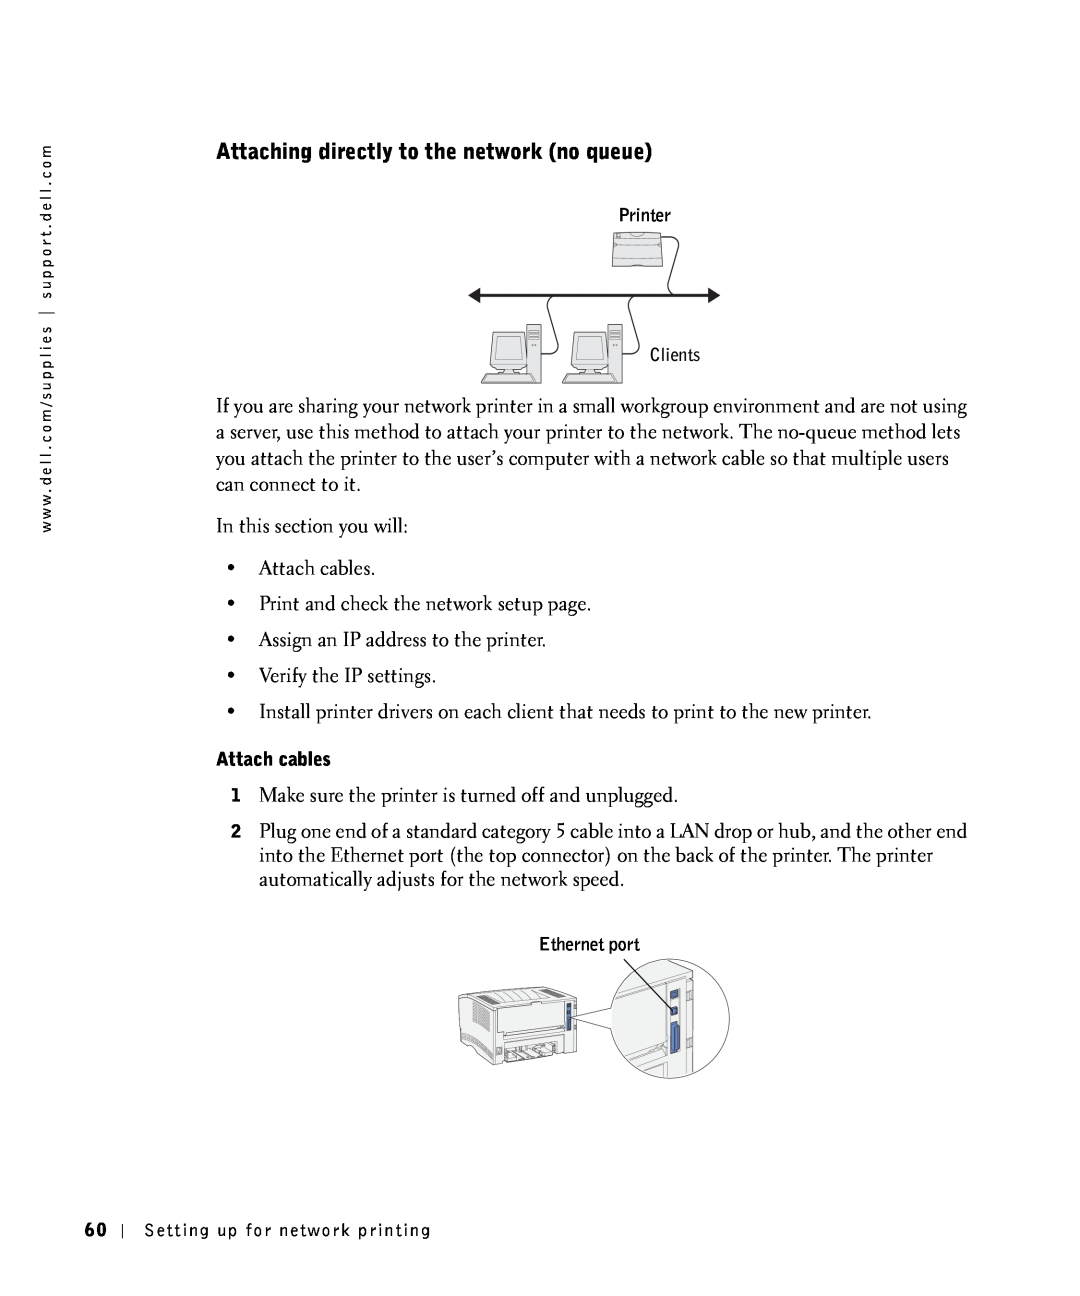 Dell S2500 owner manual Attaching directly to the network no queue, Attach cables 